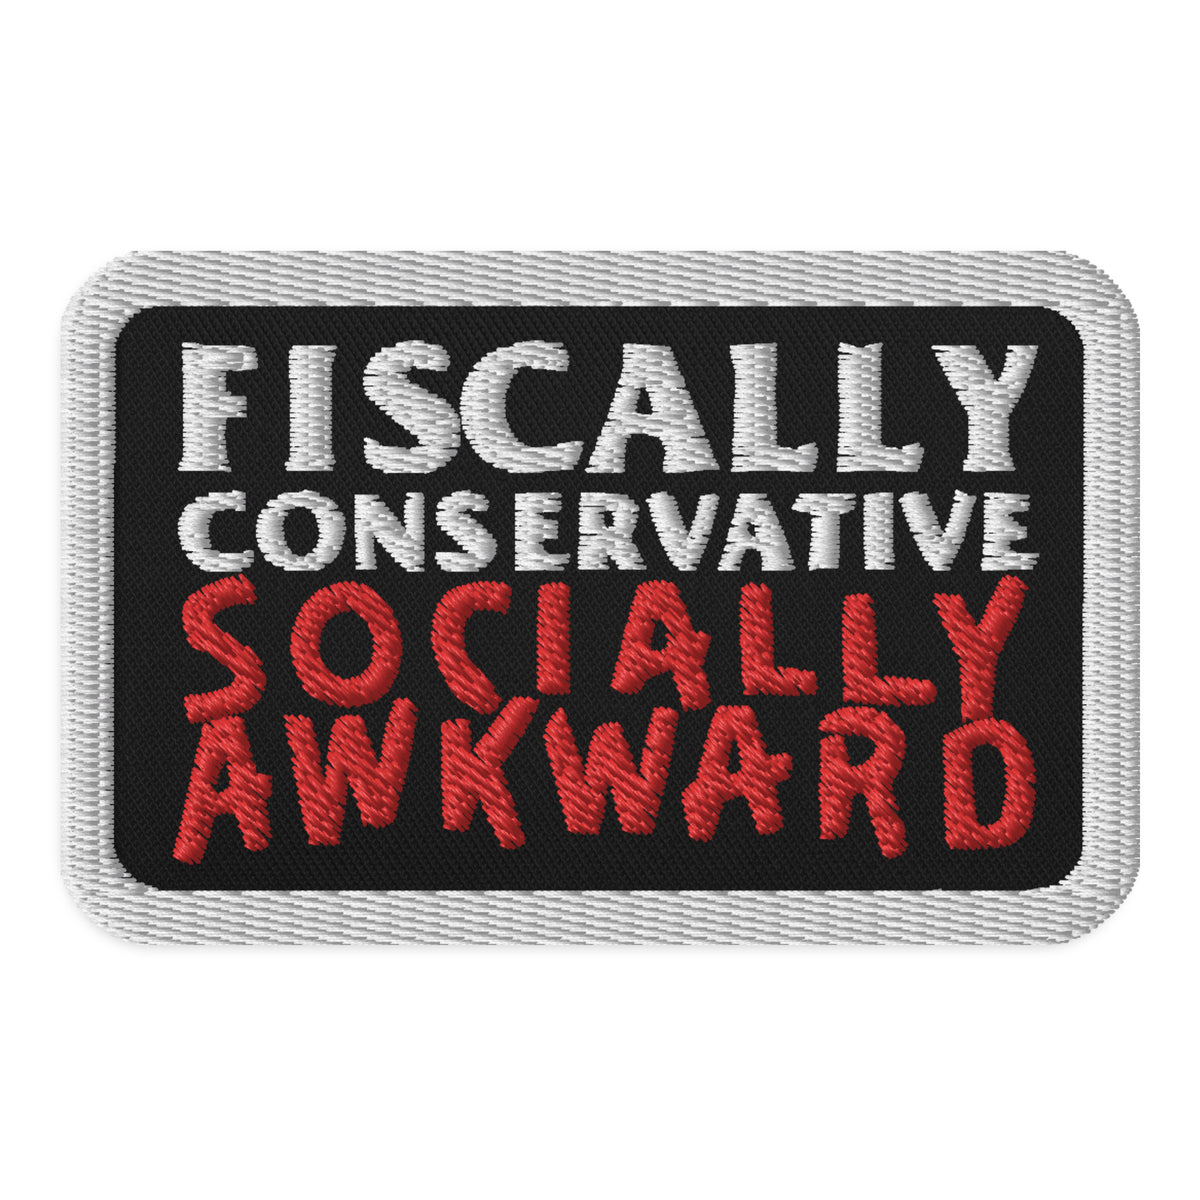 Fiscally Conservative Socially Awkward Patch